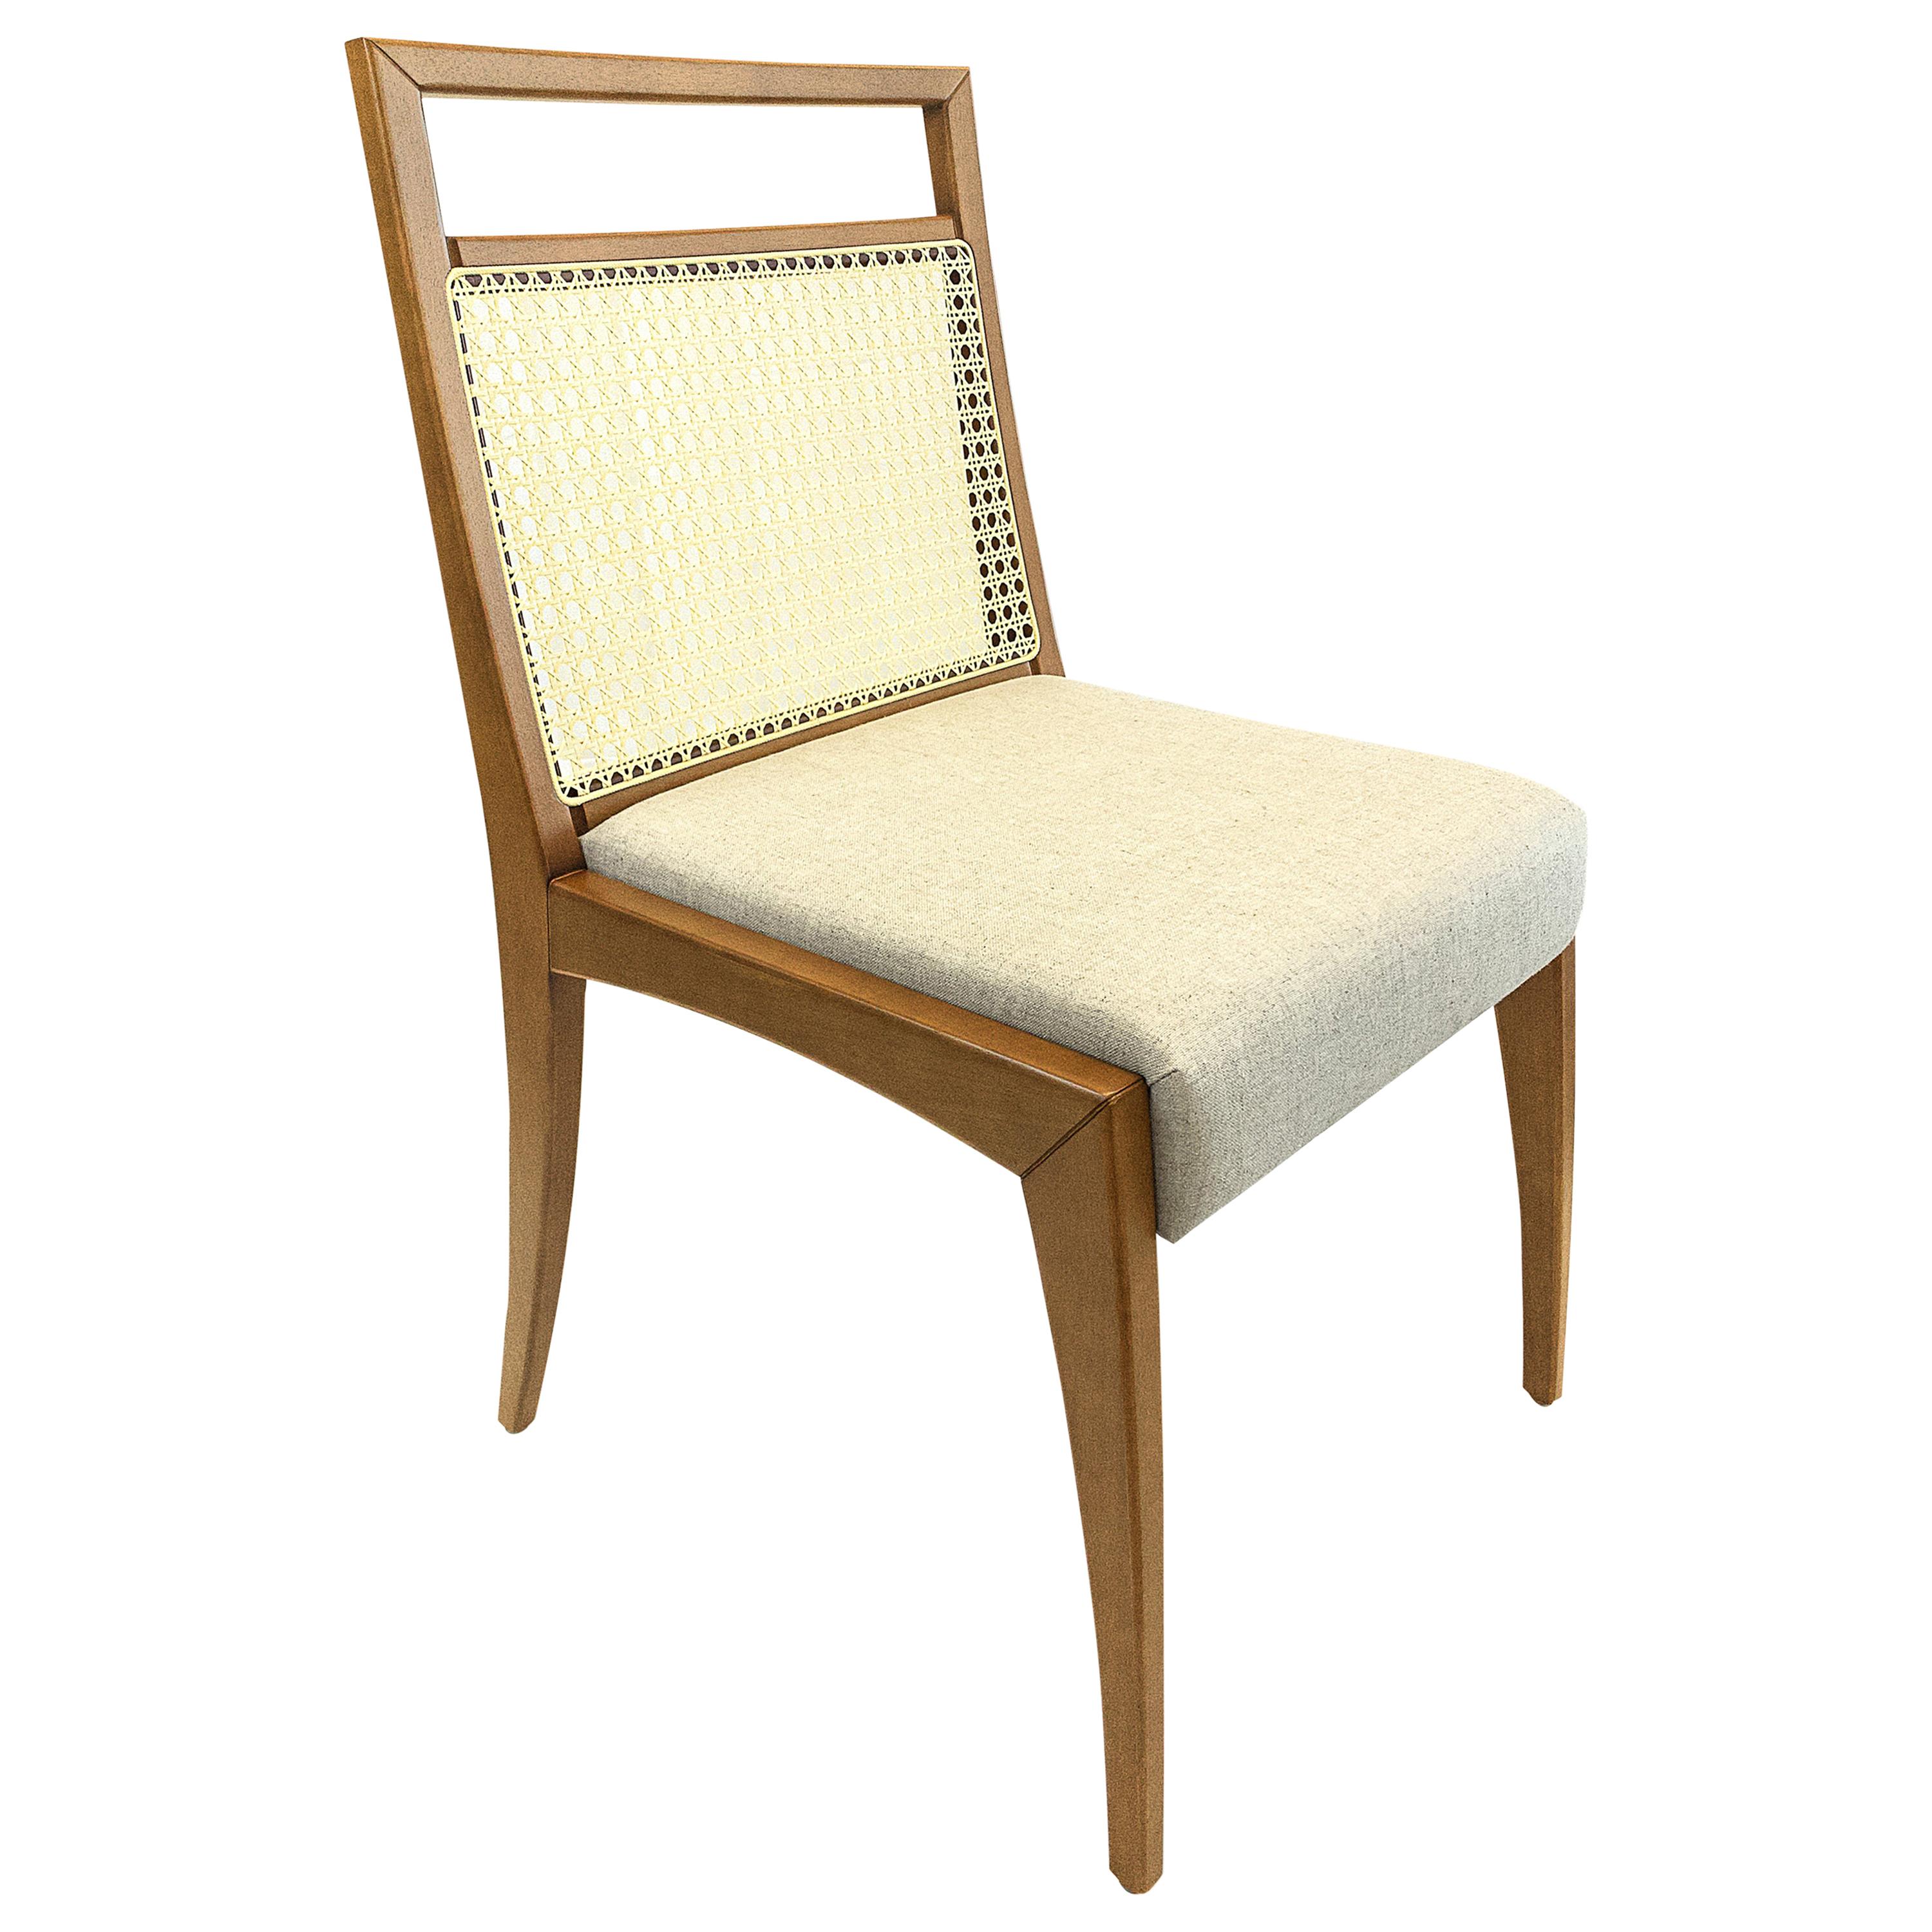 The sotto is a solid wood dining chair frame featuring a stunning cane-backing partnered with an open top rail. In stock!!!